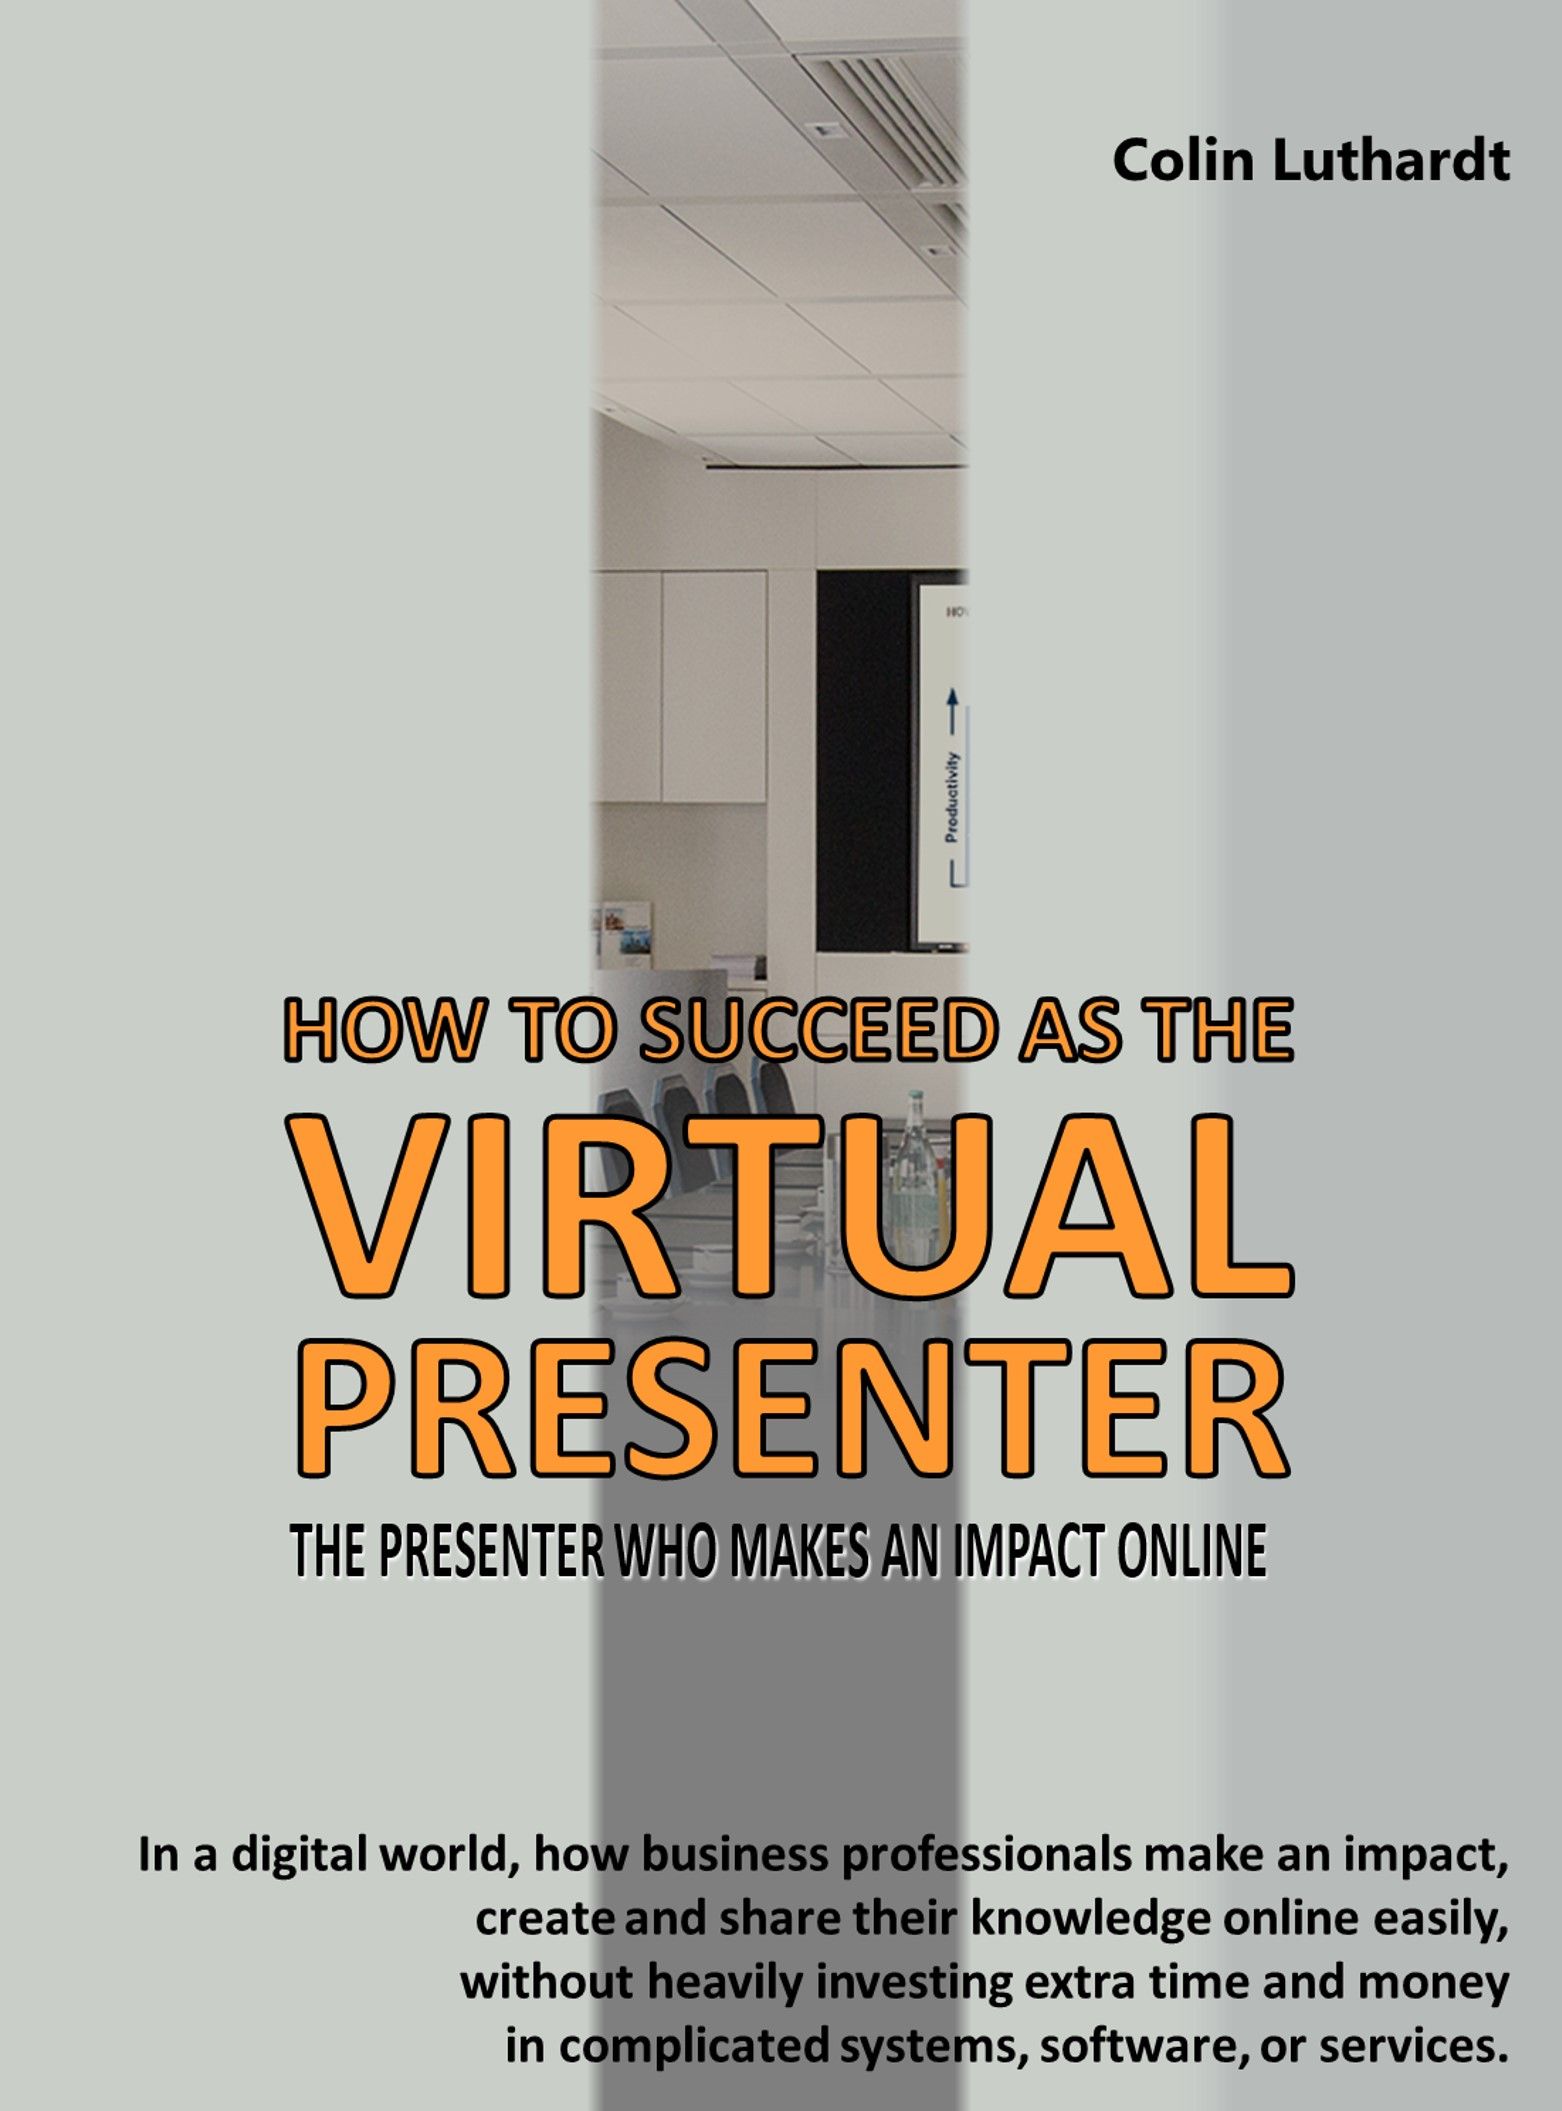 The Virtual Presenter, eBook by Colin Luthardt